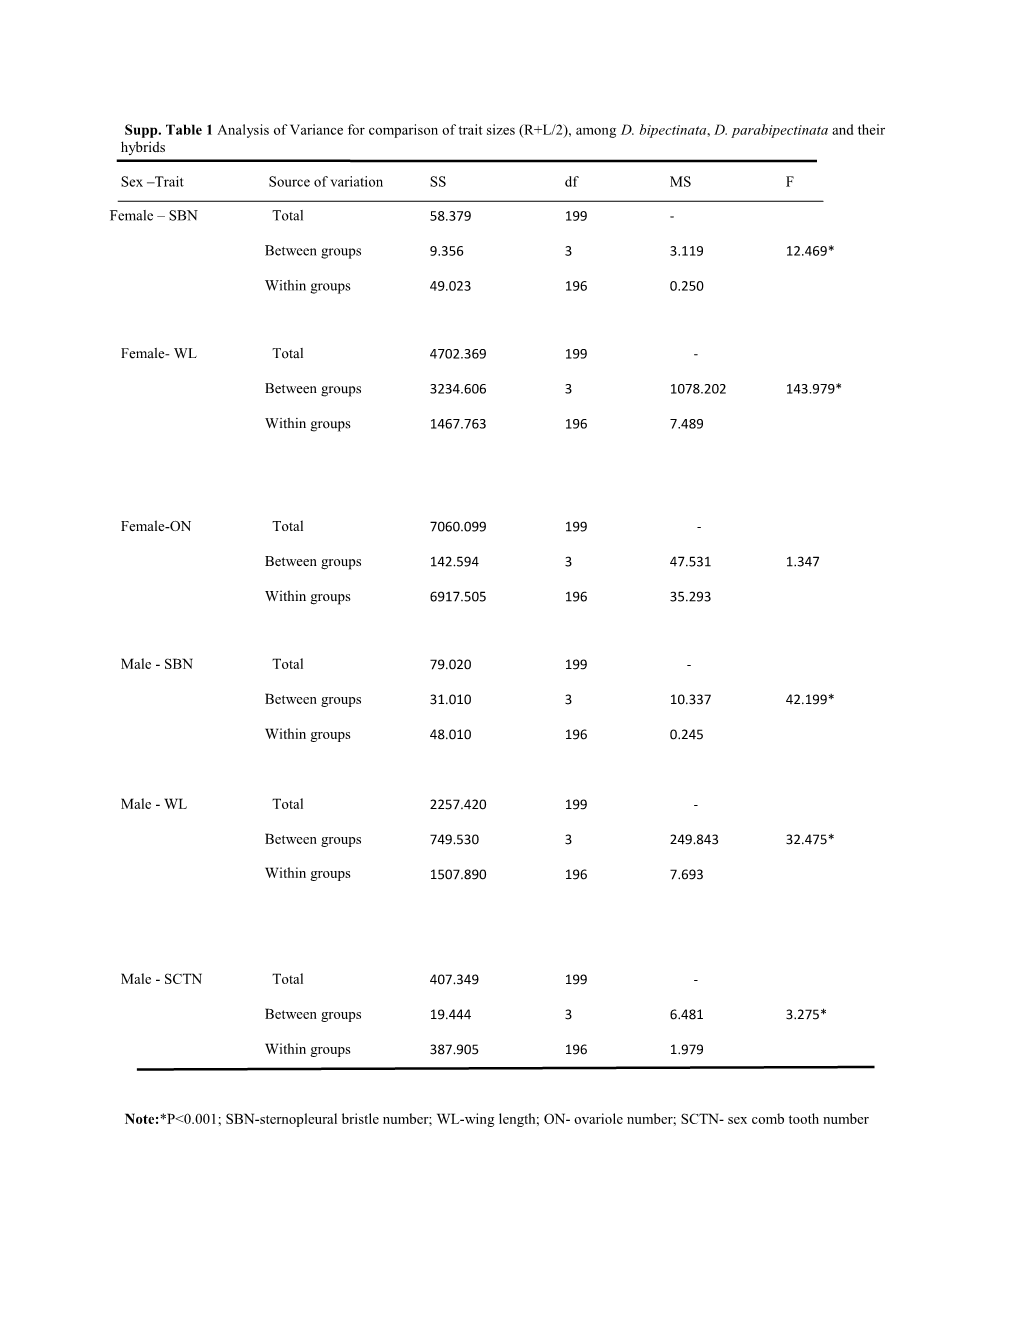 Supp. Table 1Analysis of Variance for Comparison of Trait Sizes (R+L/2), Among D. Bipectinata